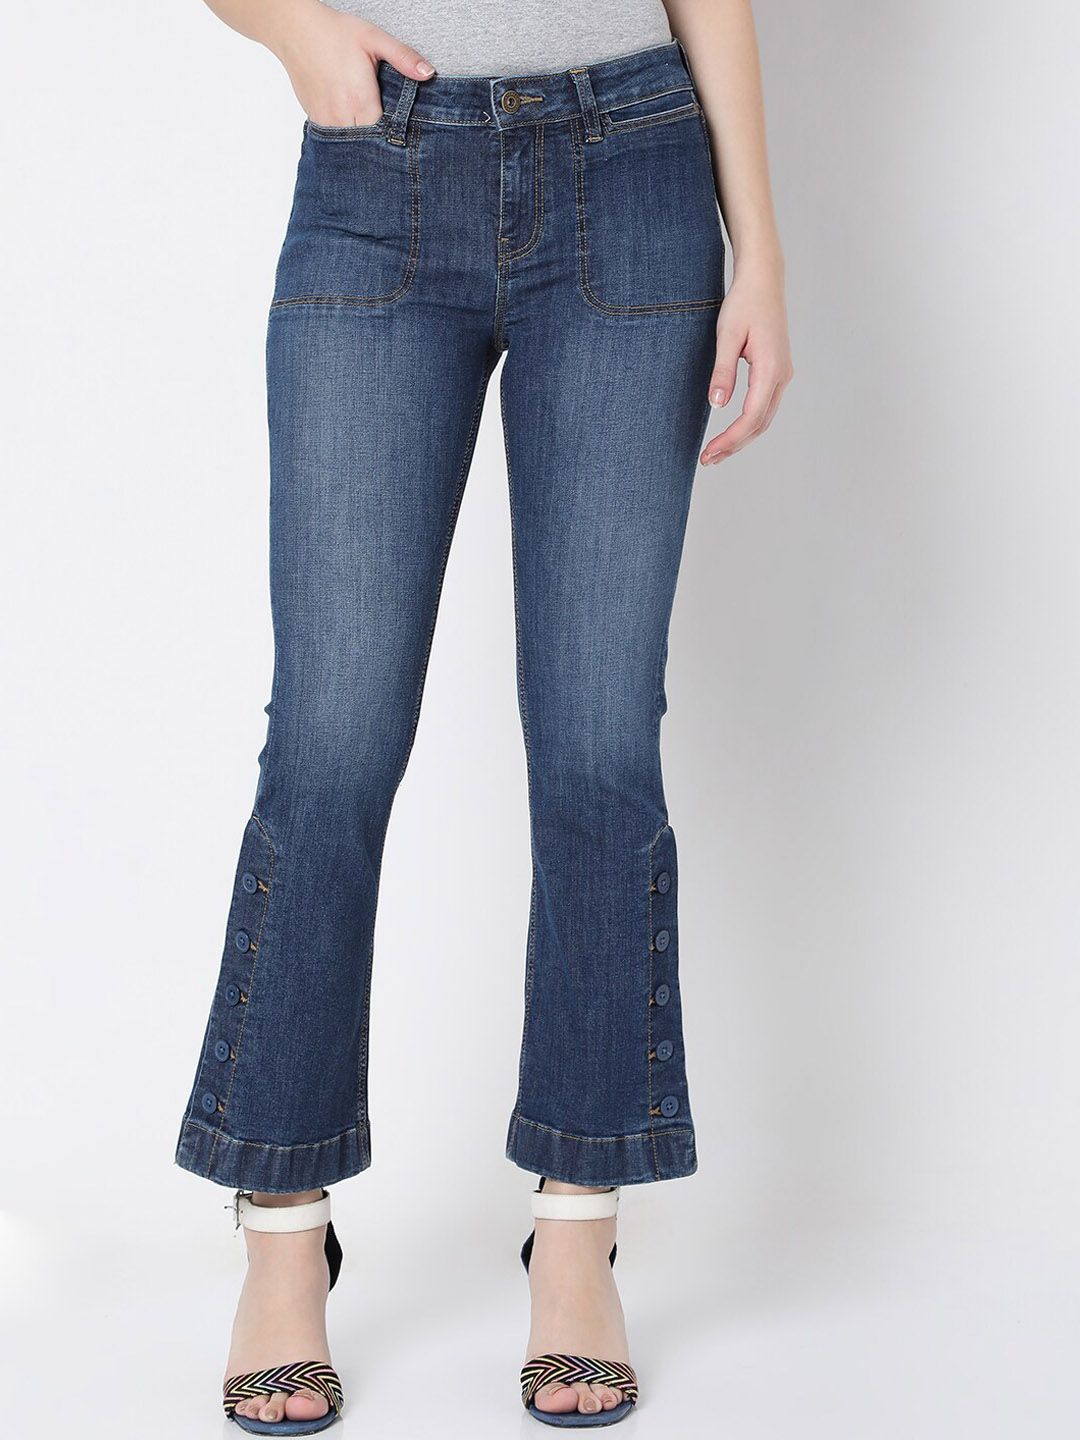 Vero Moda Women Blue Bootcut High-Rise Stretchable Jeans Price in India